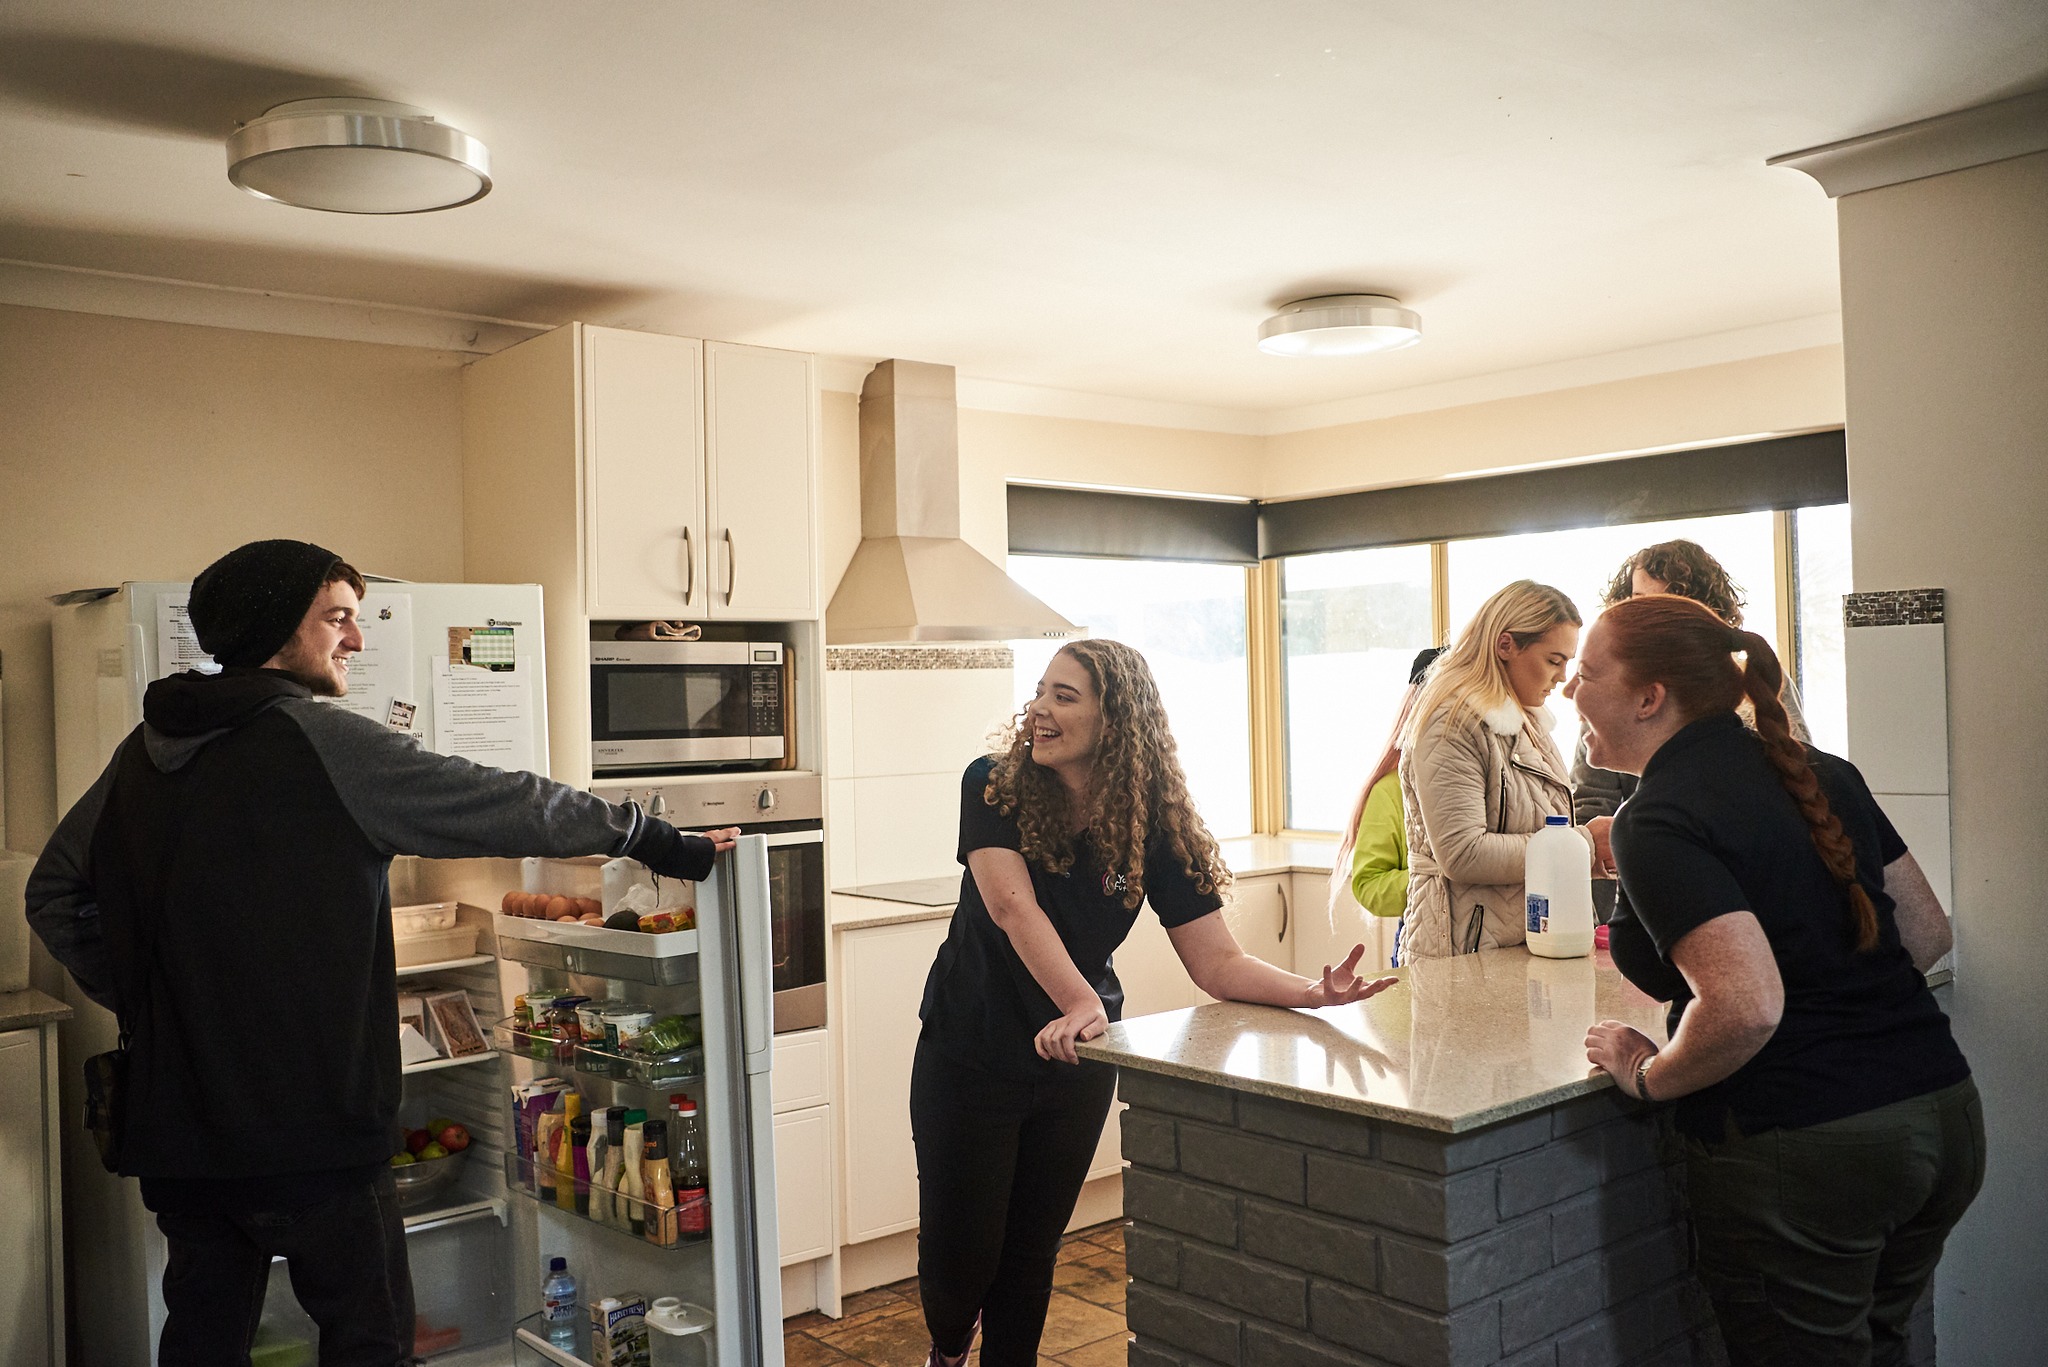 Youth Futures WA clients in housing